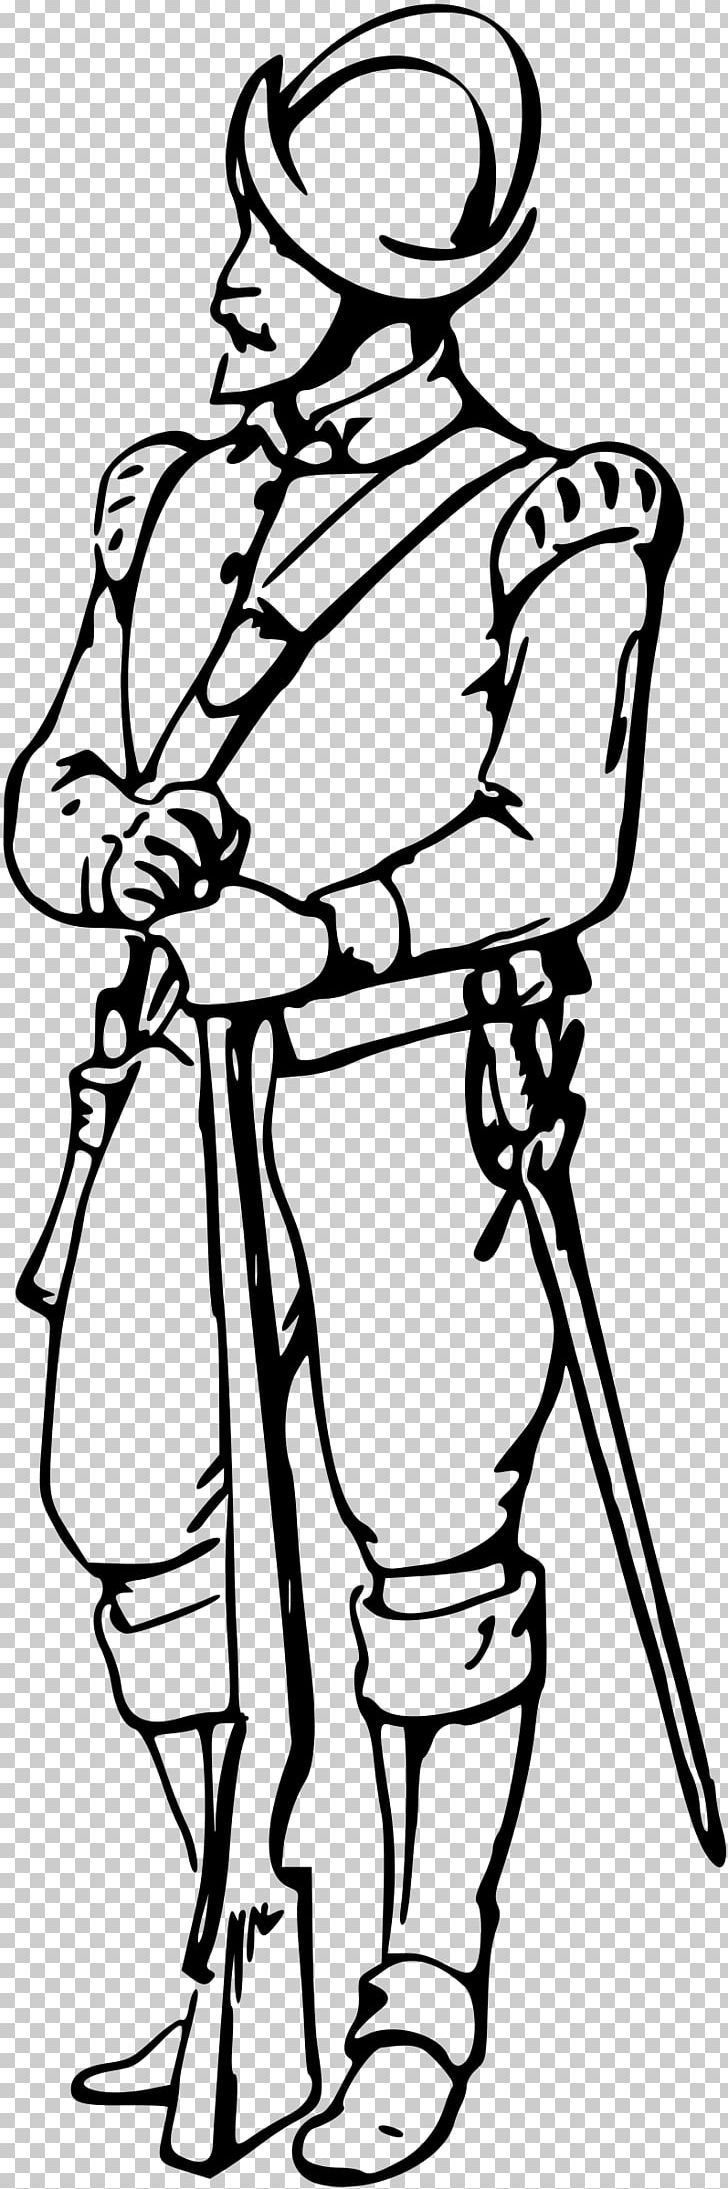 Musketeer Soldier PNG, Clipart, Artwork, Battle, Black, Black And White, Drawing Free PNG Download